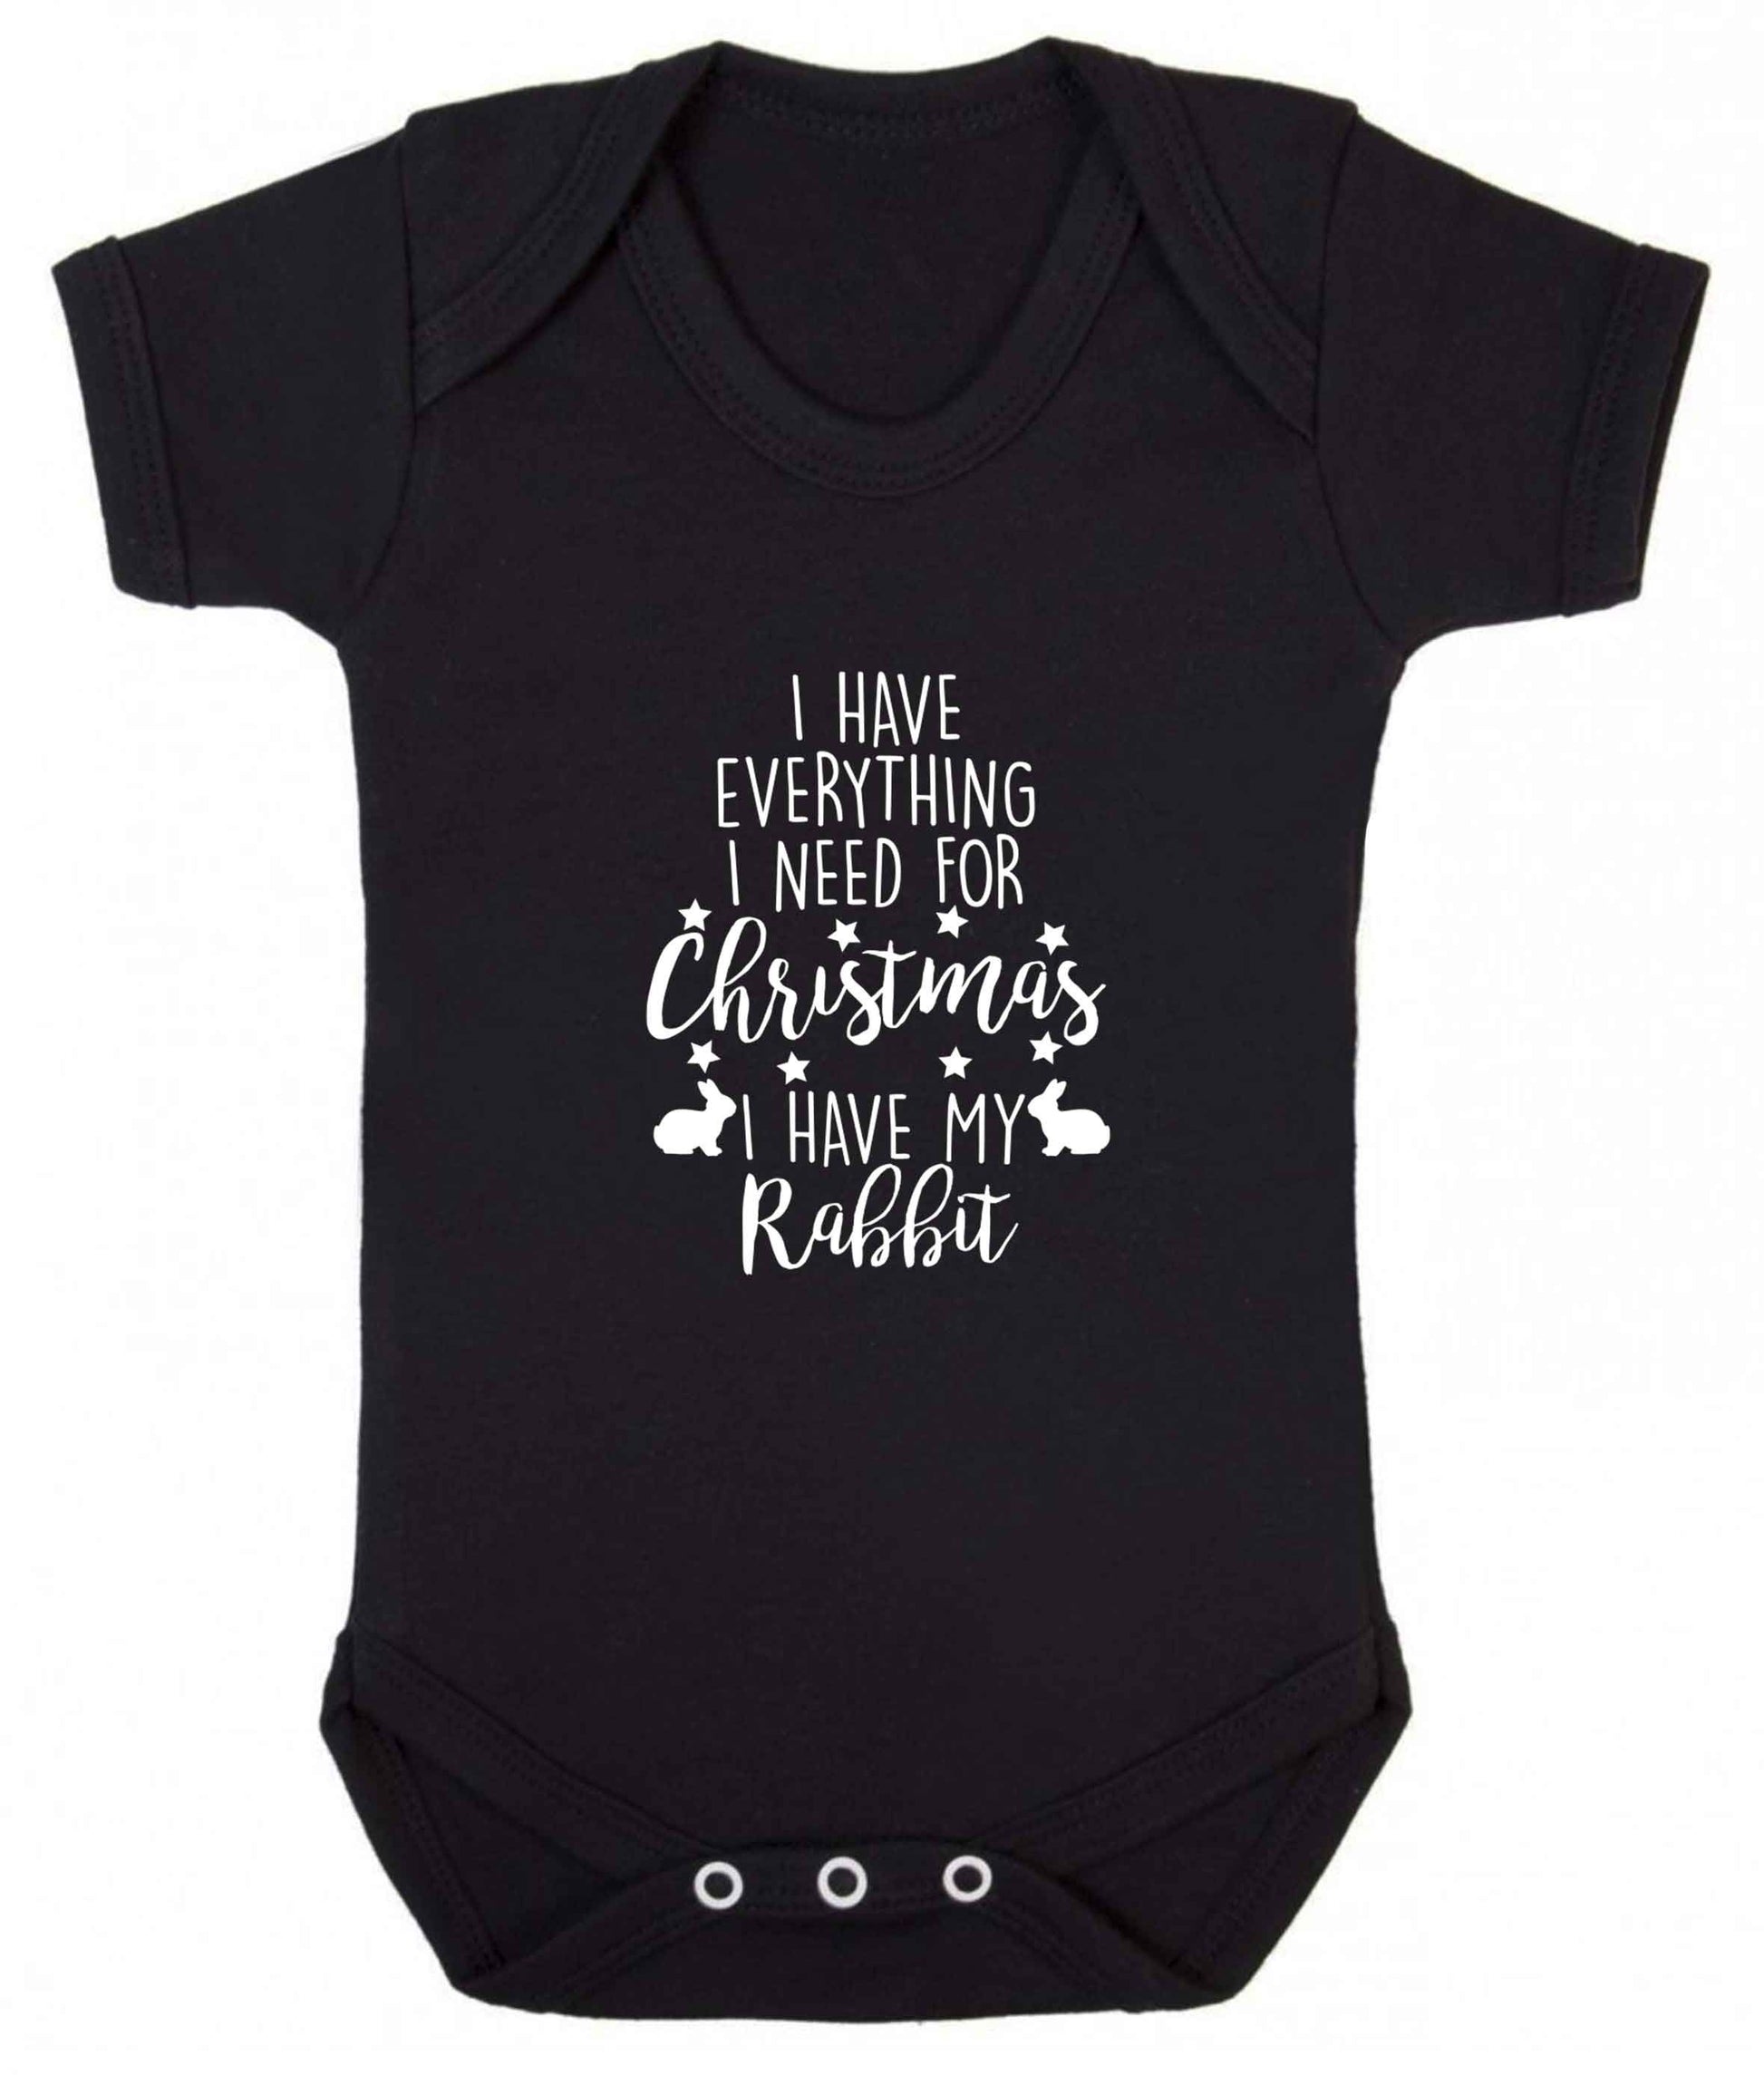 I have everything I need for Christmas I have my rabbit baby vest black 18-24 months